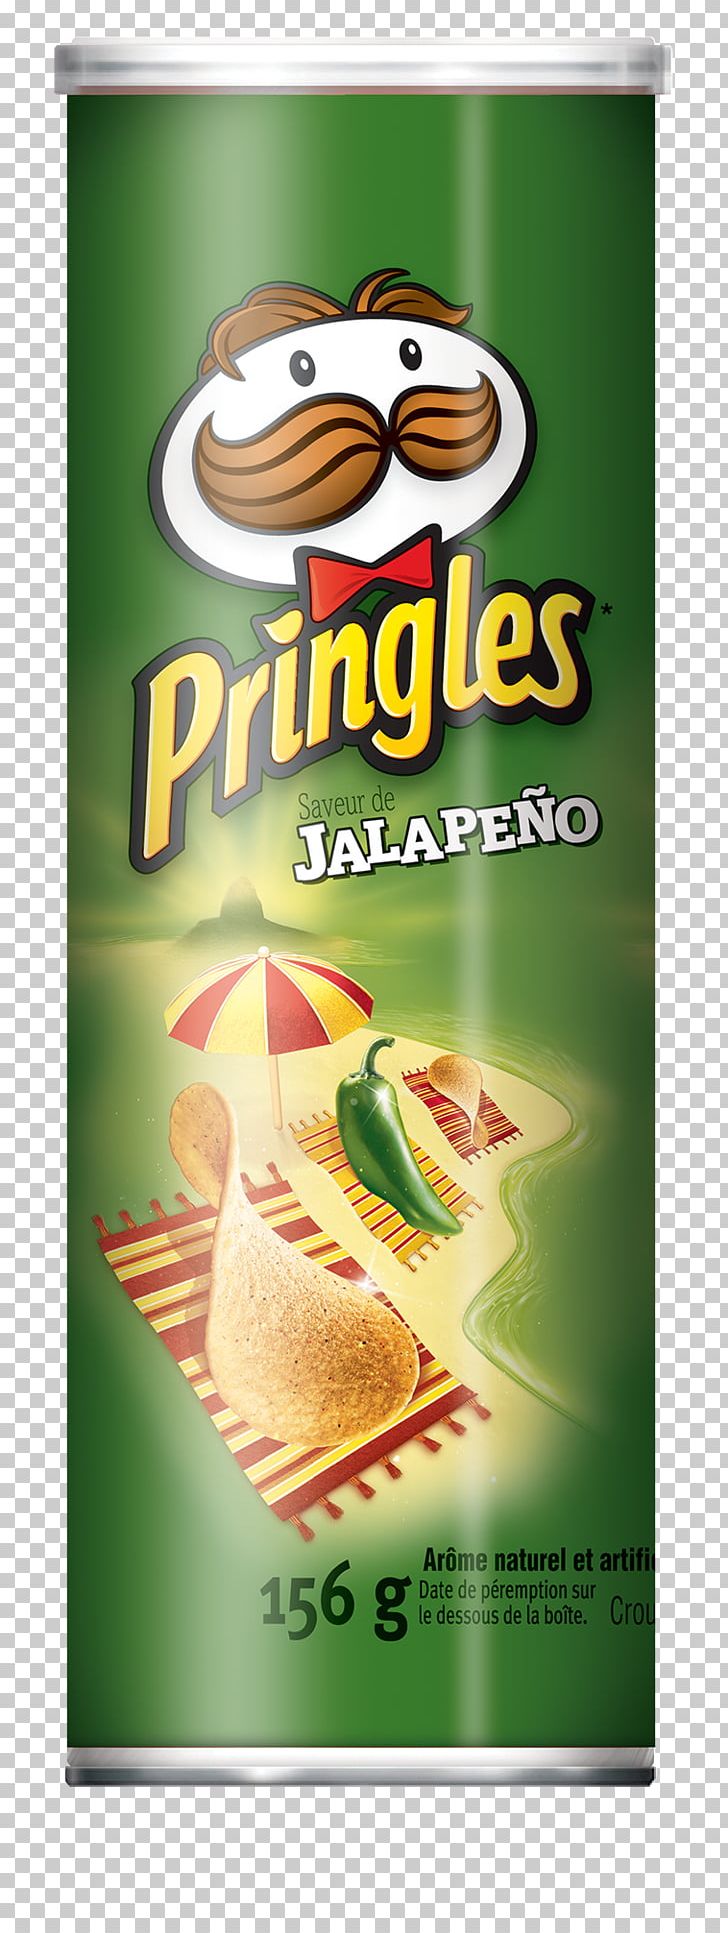 Lay's Potato Chip Pringles Barbecue Flavor PNG, Clipart, Barbecue Flavor, Potato Chip, Pringles Free PNG Download